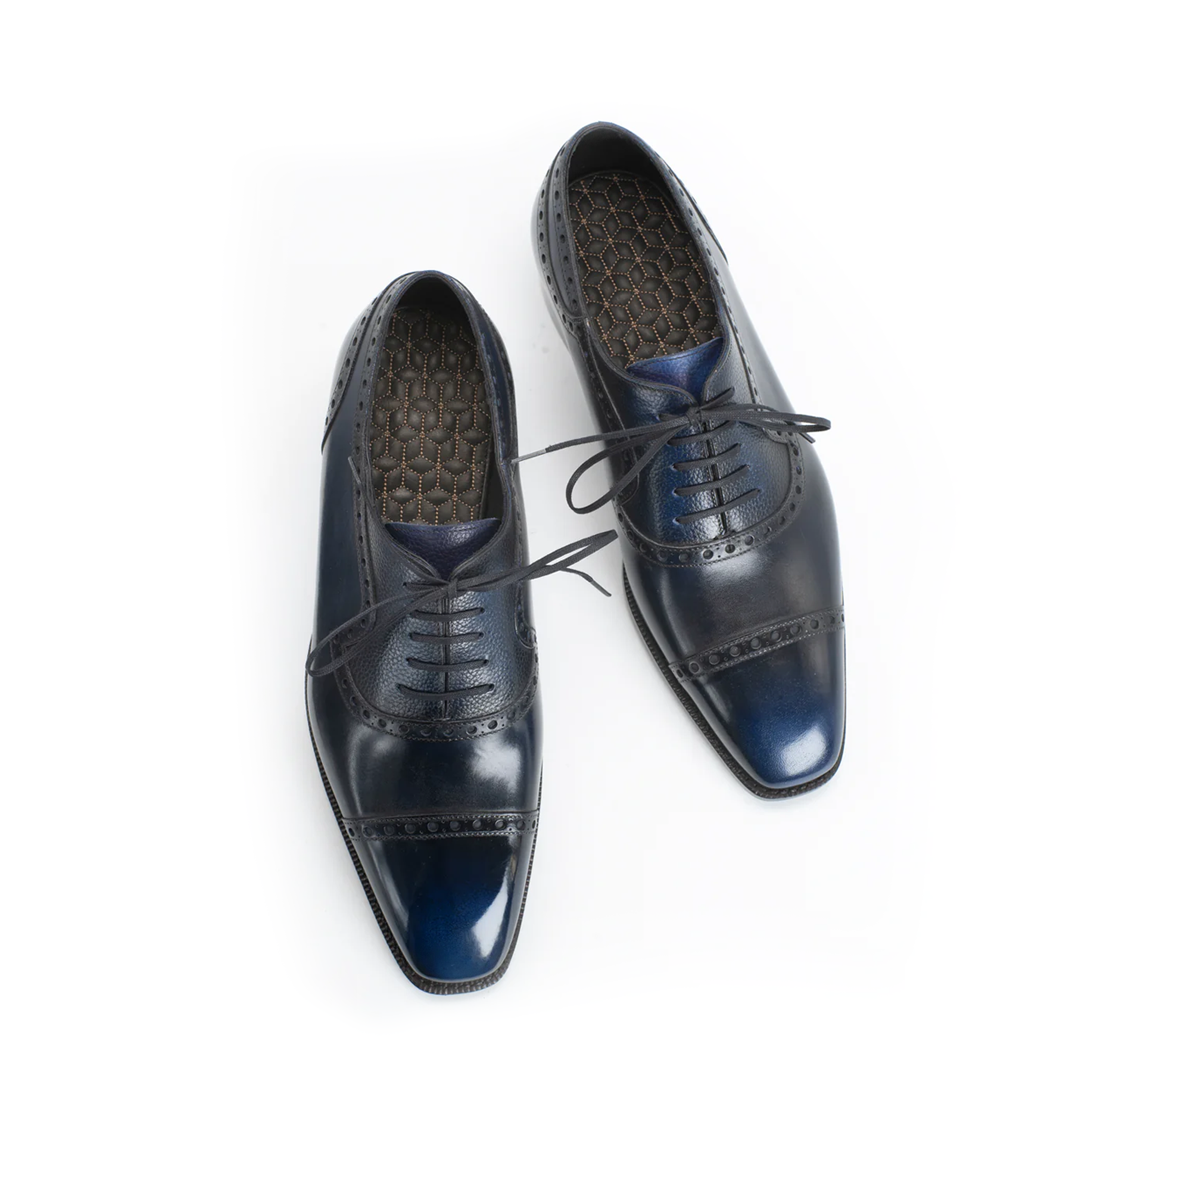 Penelope Brogues Oxford Shoes